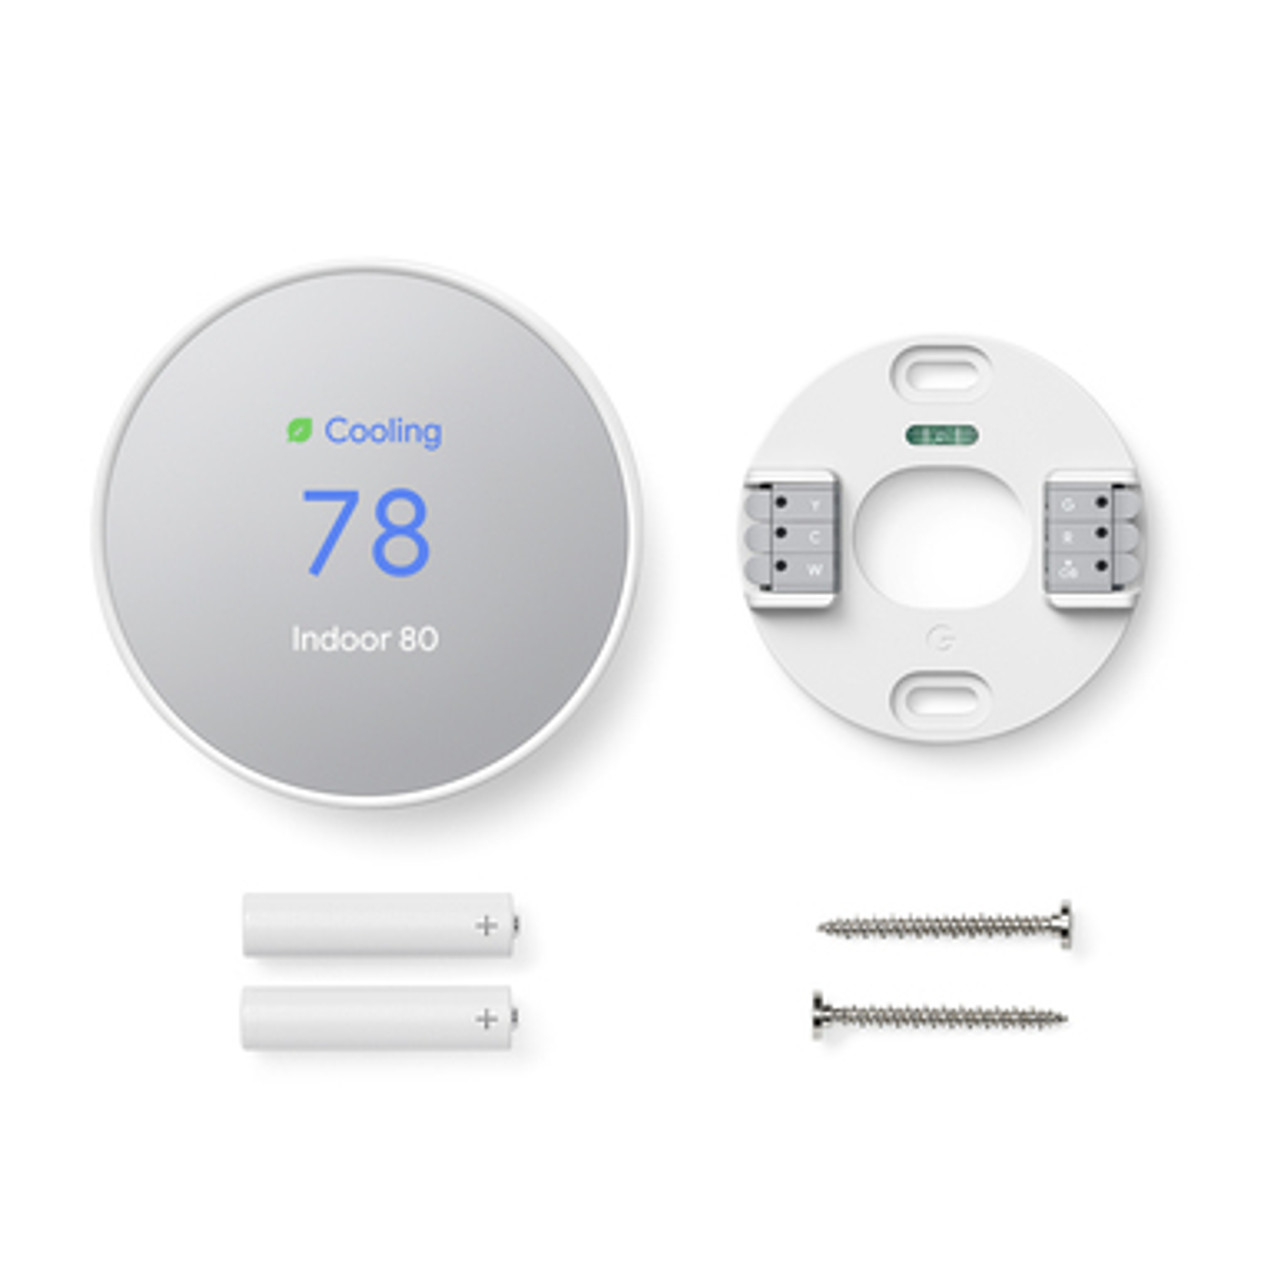 Nest thermostat, back plate, anchors and screws